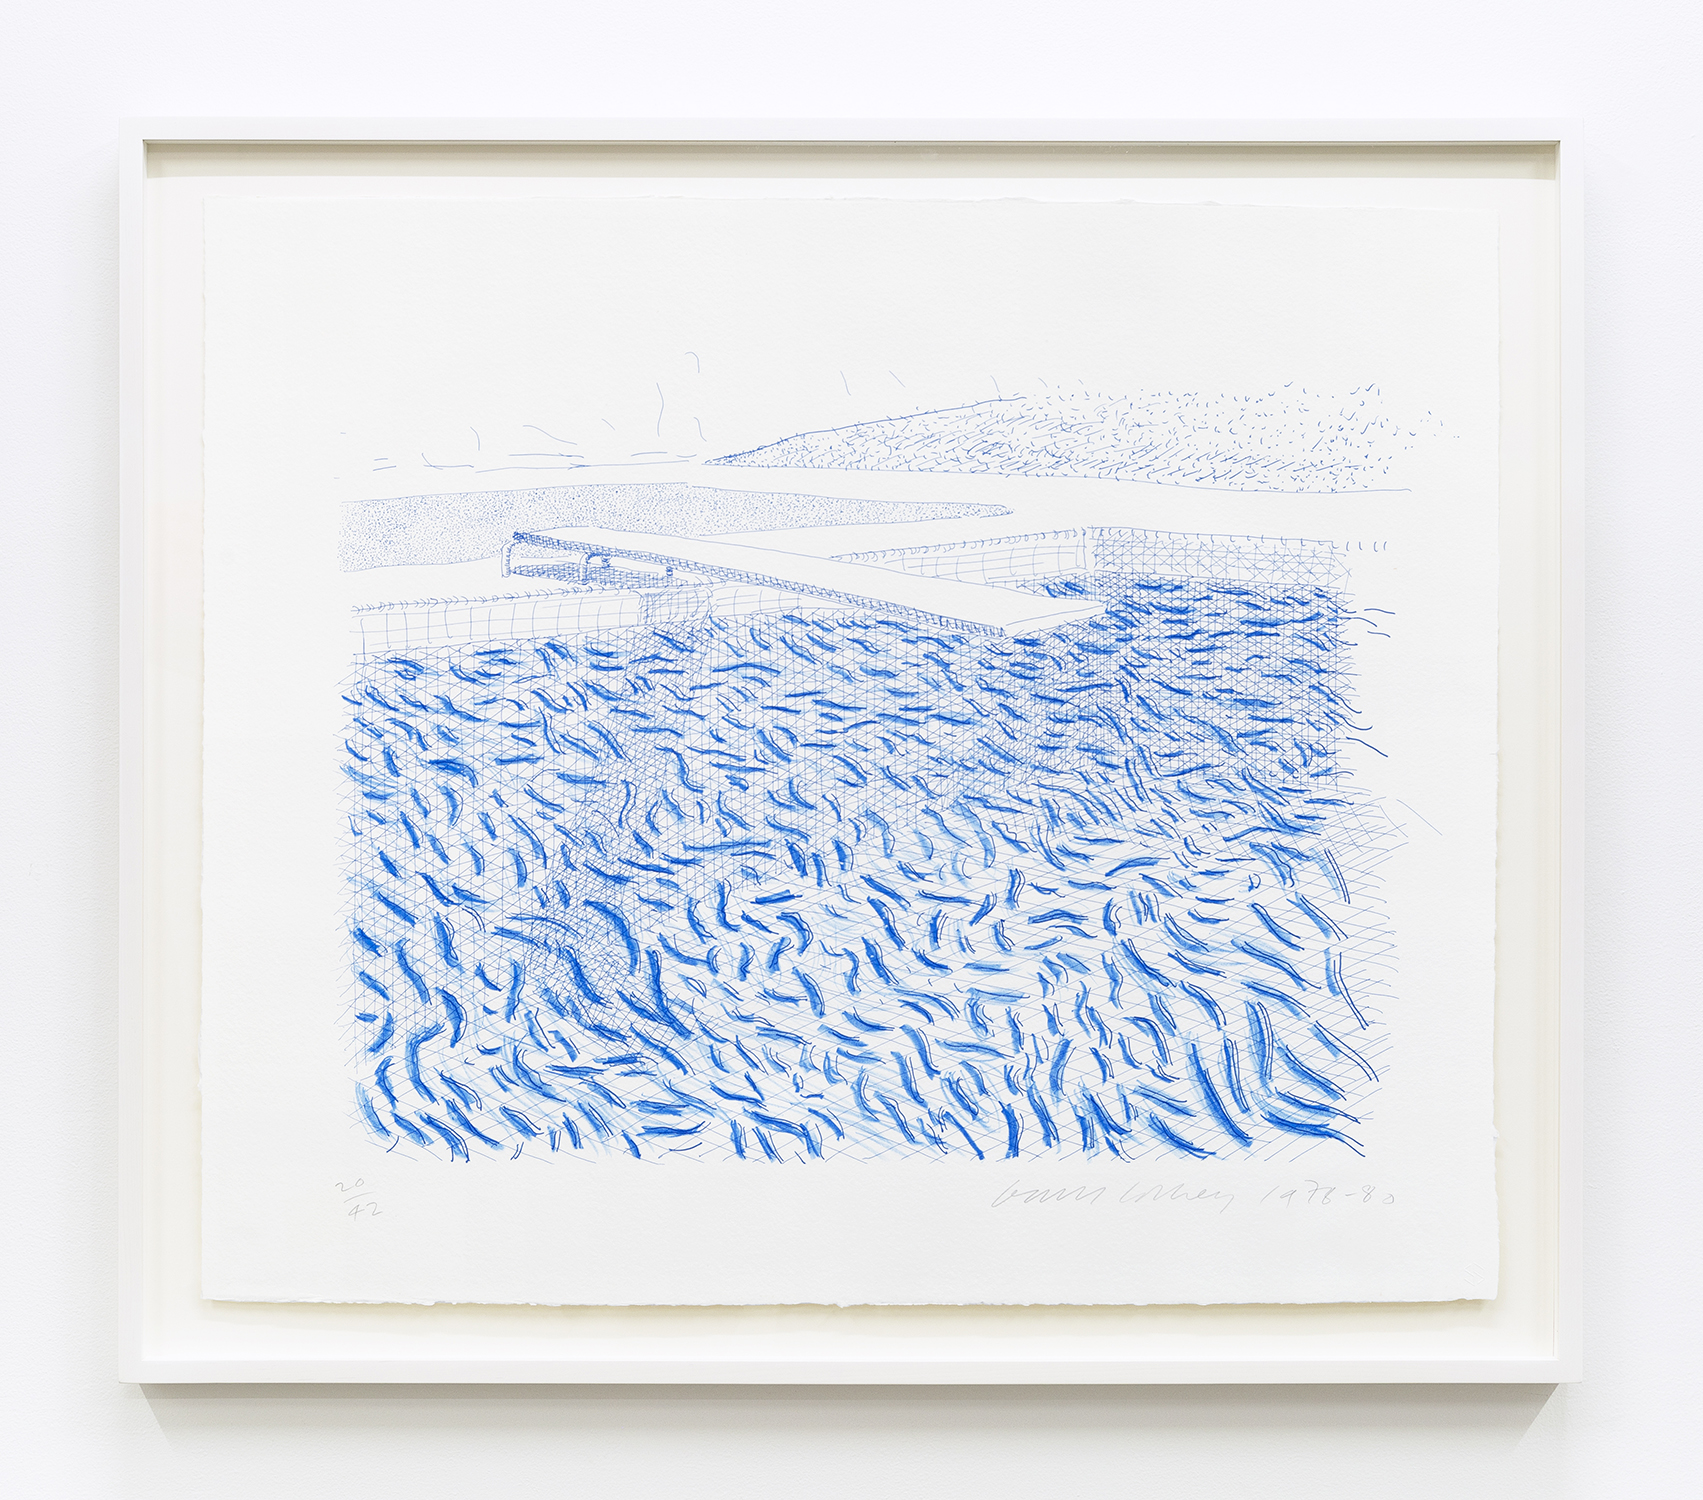 David Hockney Lithographic Water Made of Lines and Crayon, 1978-1980 Lithograph Image Dimensions: 21 1/2 x 29 3/4 inches (54.6 x 745.2 cm) Paper Dimensions: 29 1/4 x 34 inches (74.3 x 86.4 cm) Edition of 42